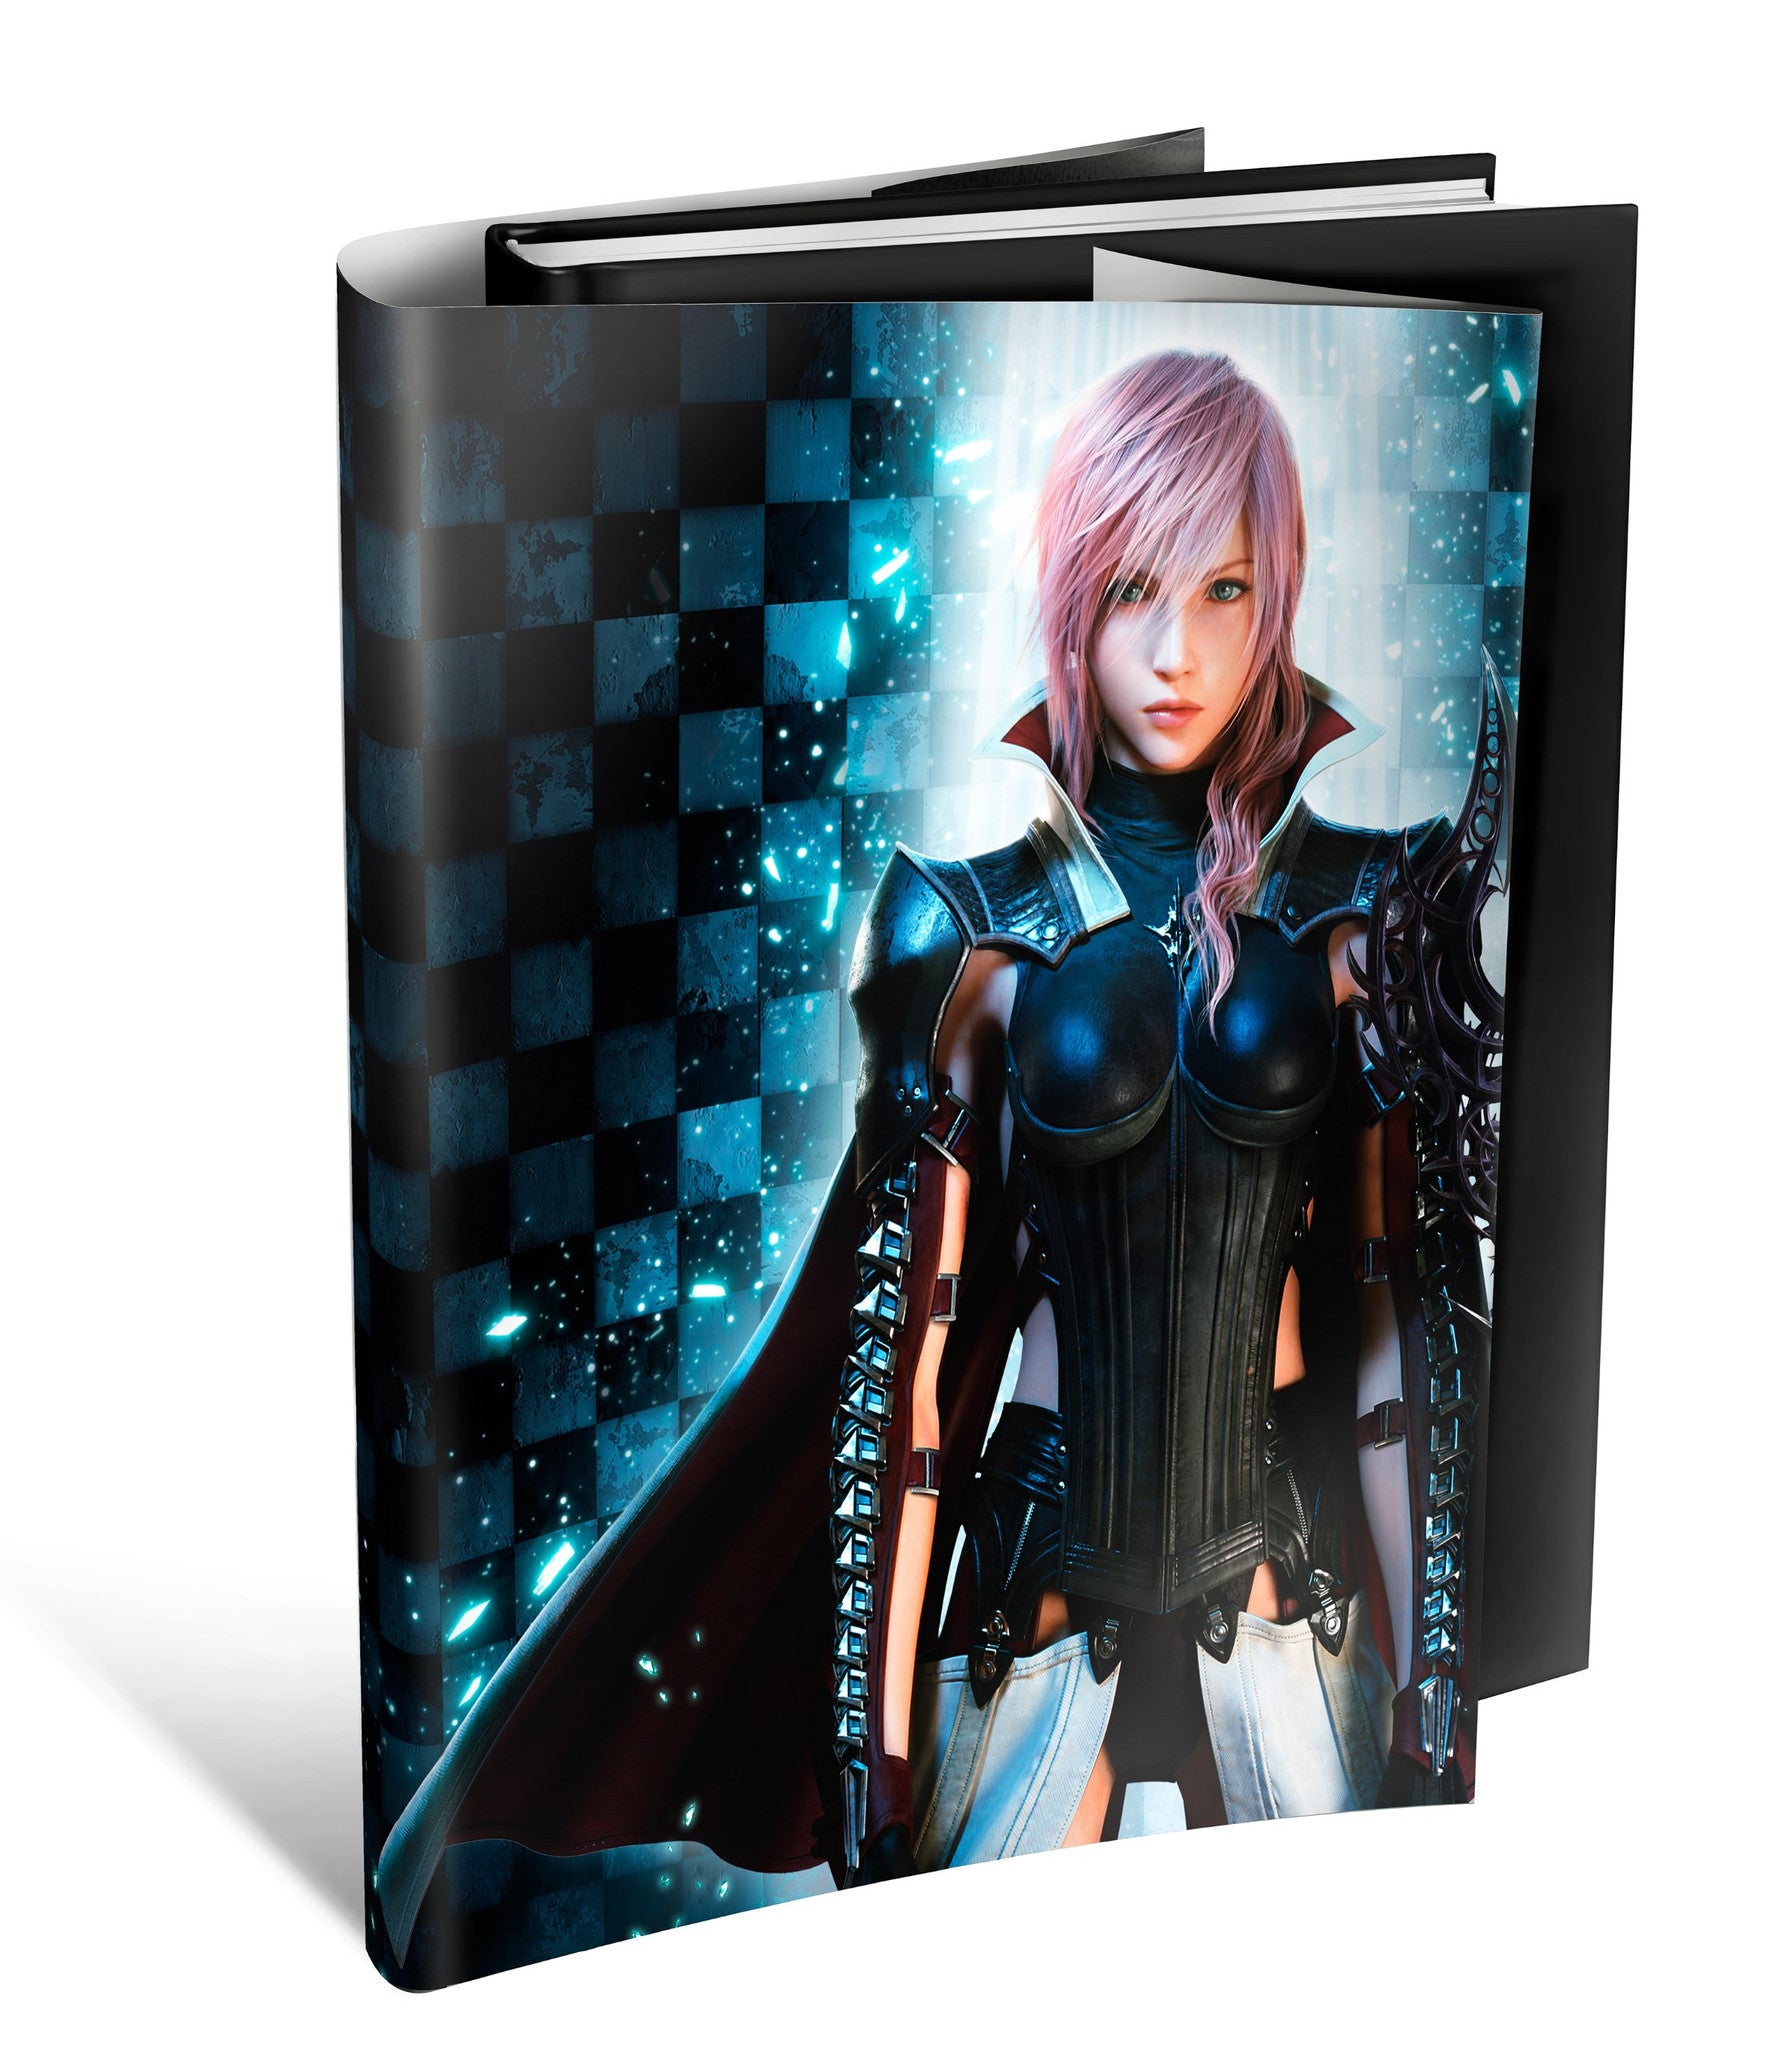 Lightning Returns: Final Fantasy XIII: The Complete Official Guide - Collector's Edition